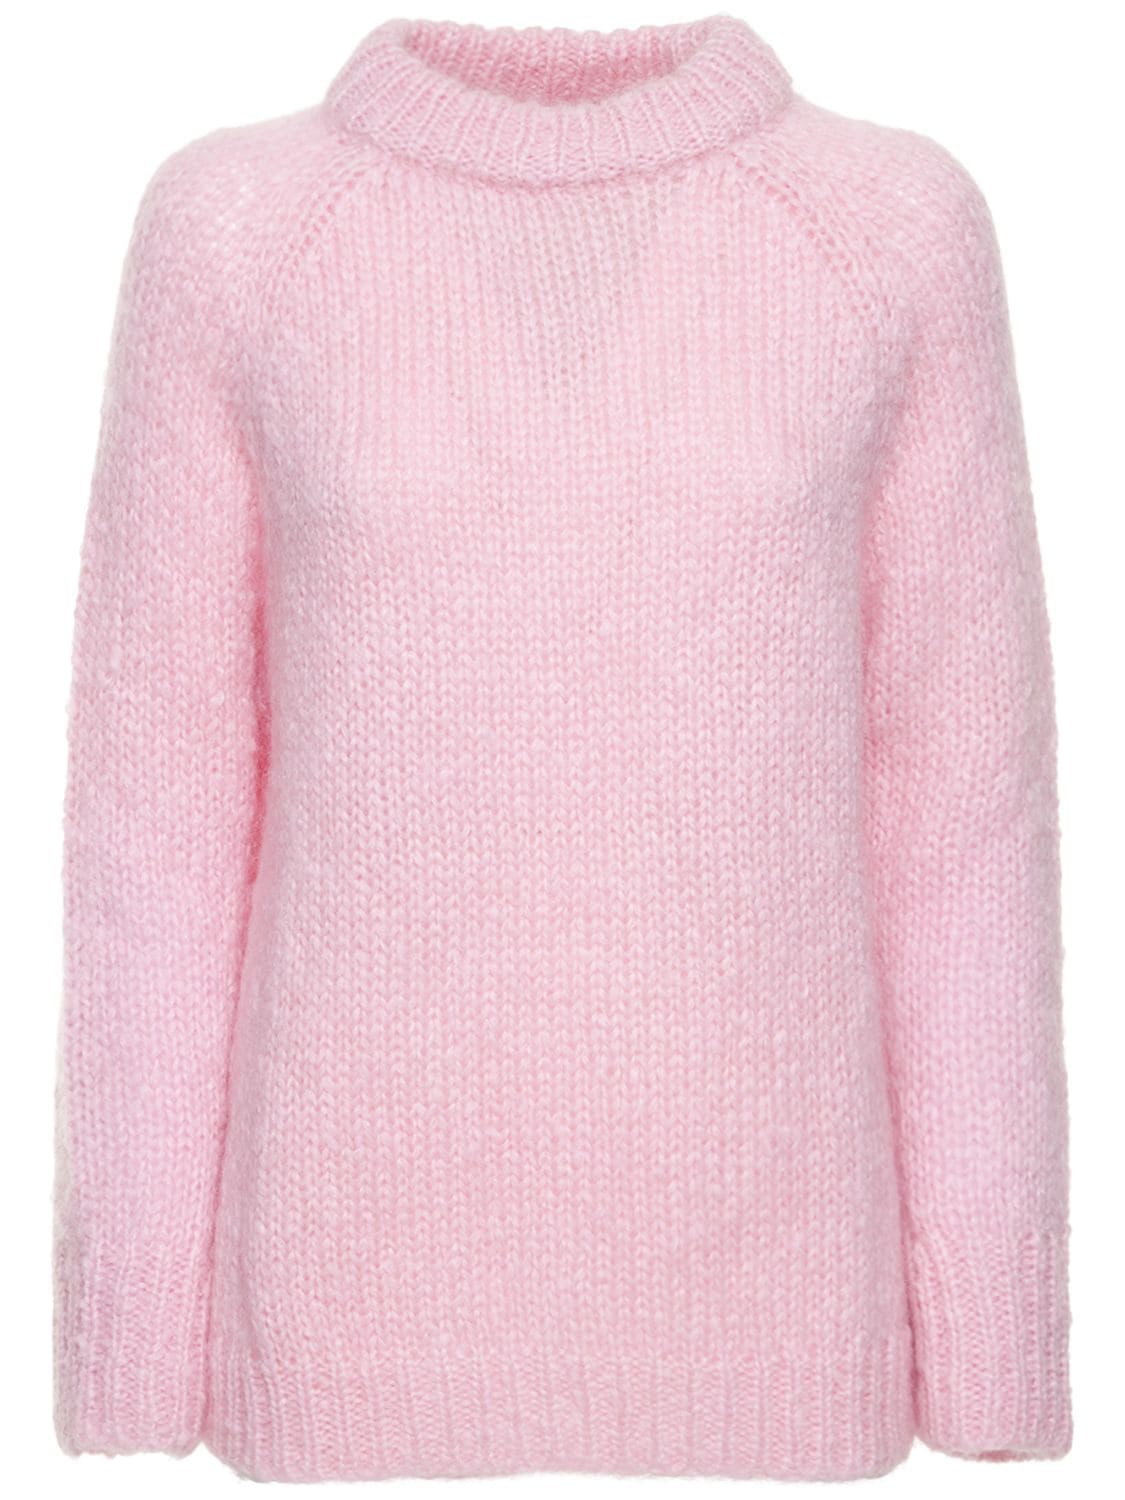 CECILIE BAHNSEN INDIRA CREWNECK FITTED MOHAIR SWEATER